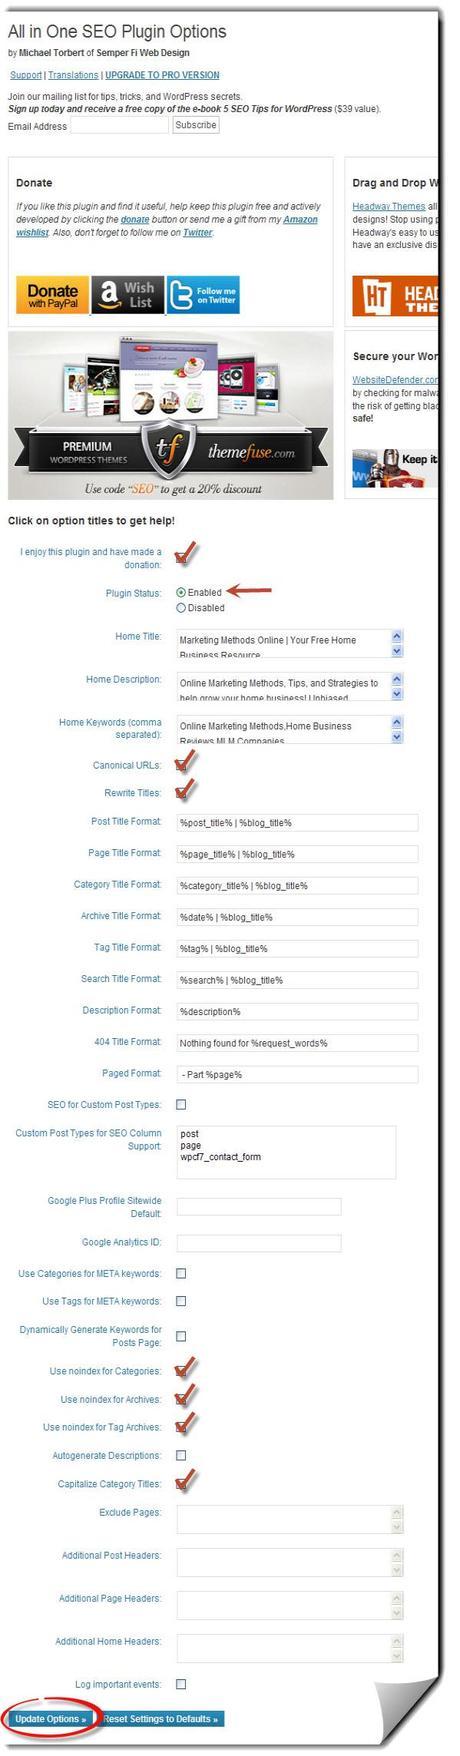 All in One SEO Pack Settings Page image